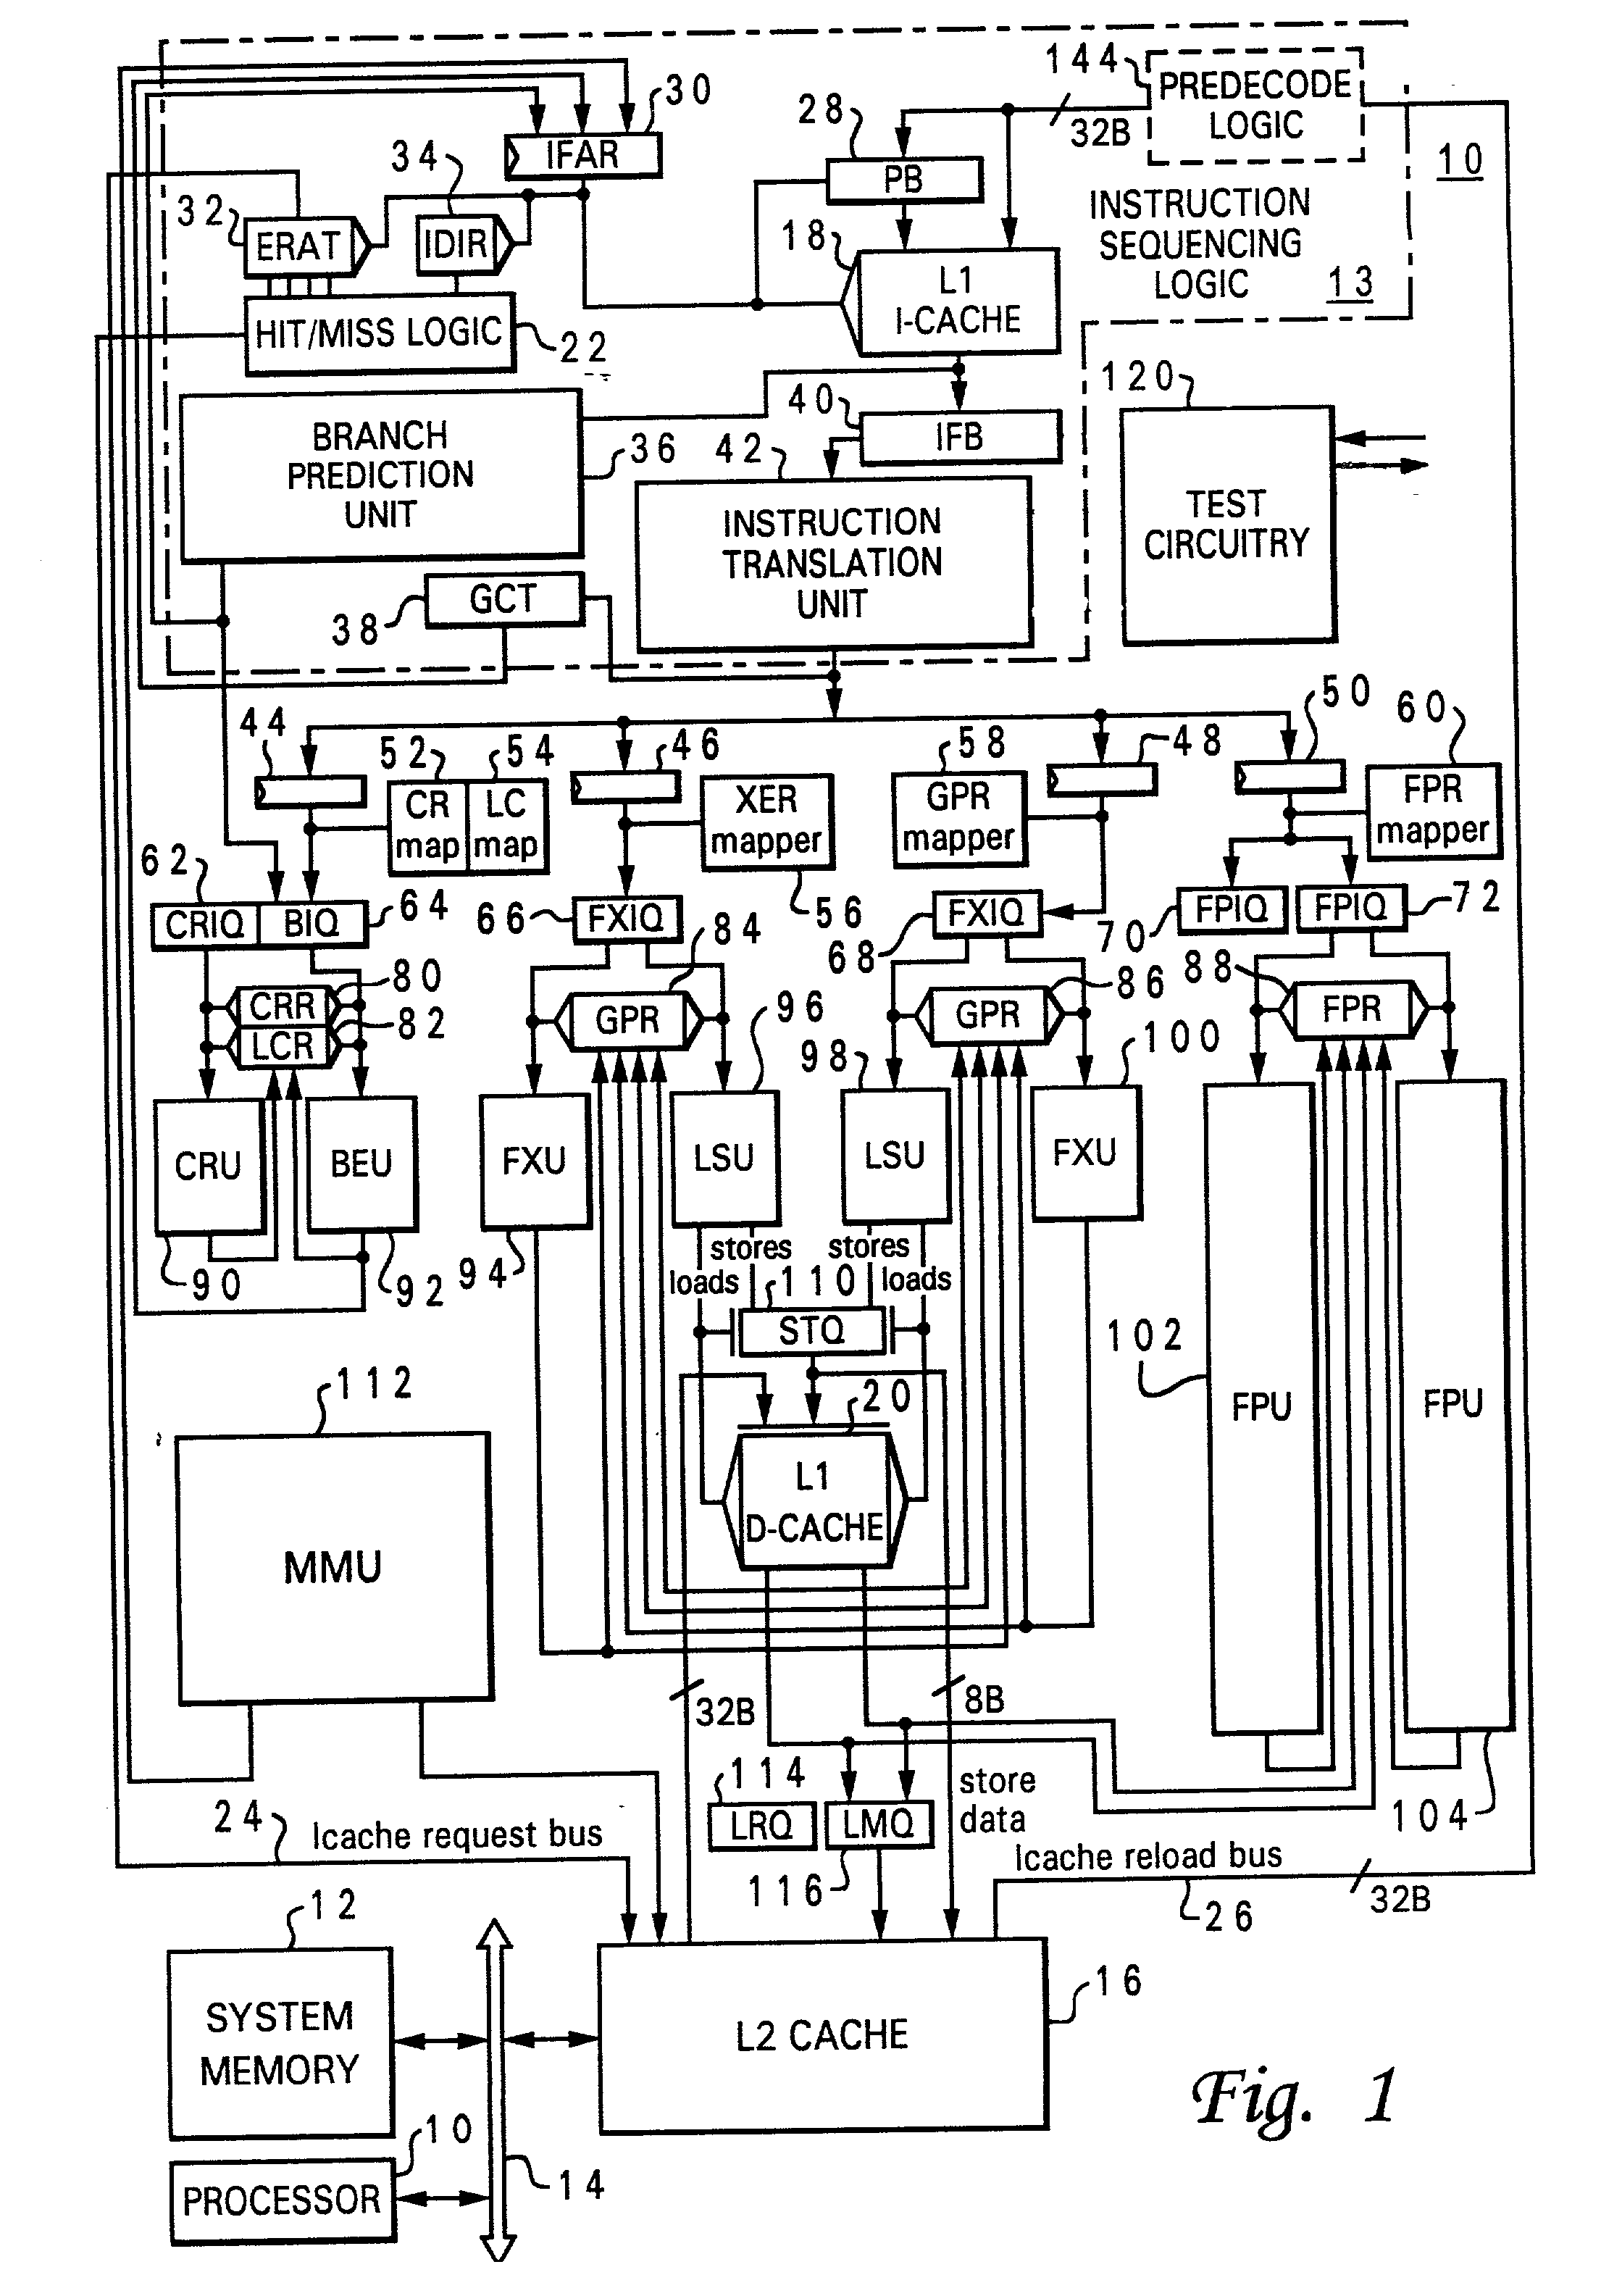 Processor and method of testing a processor for hardware faults utilizing a pipeline interlocking test instruction